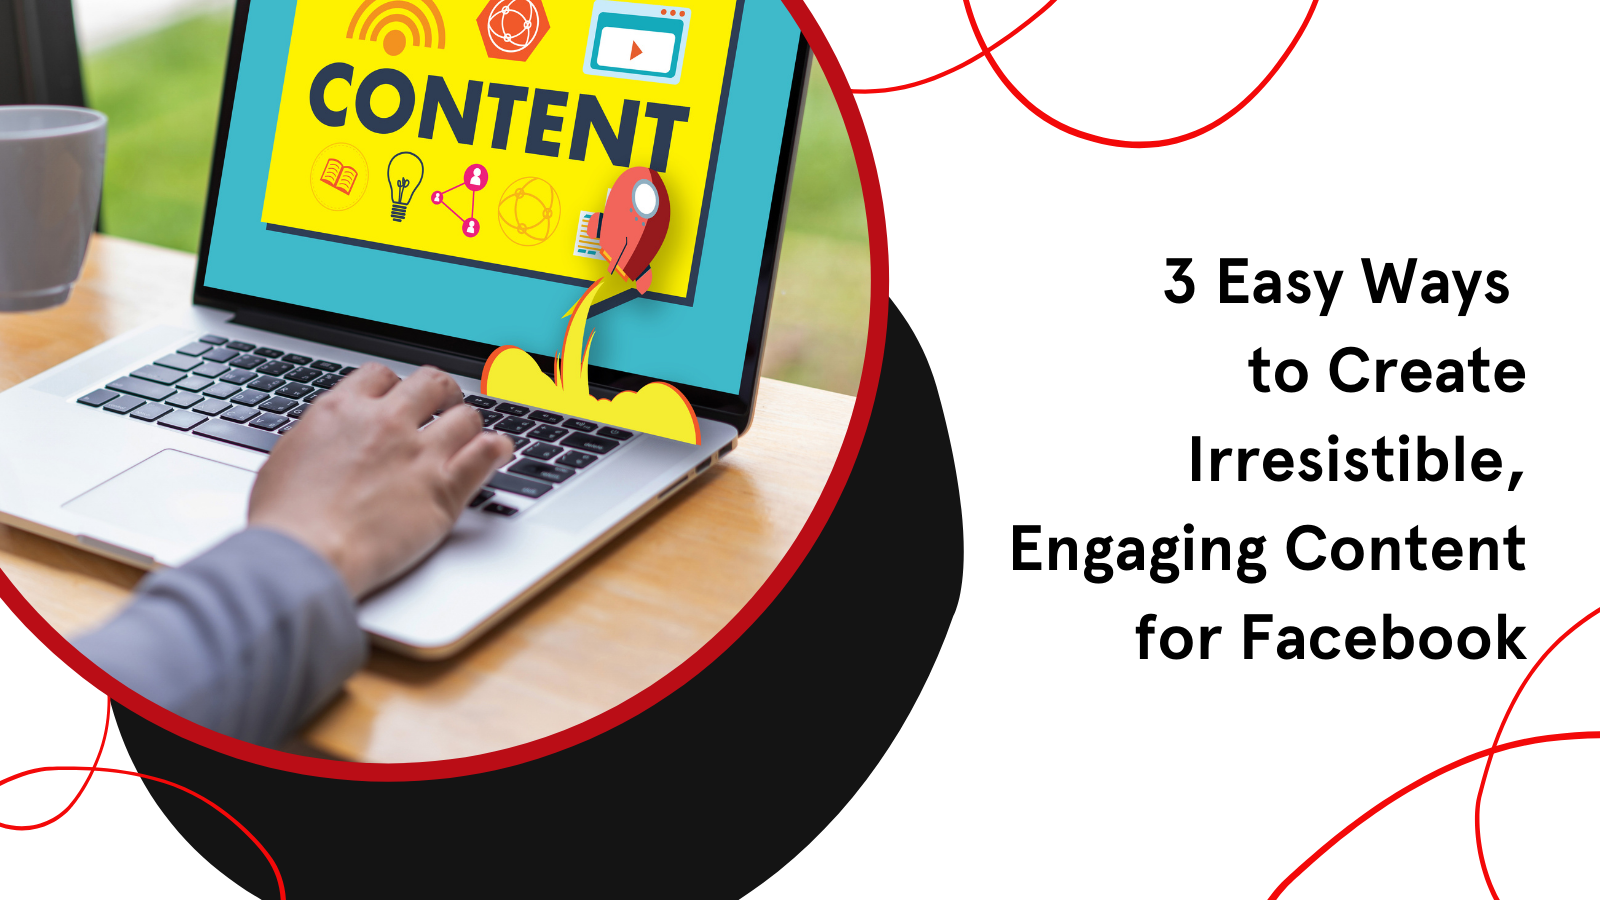 Create Irresistible, Engaging Content for Facebook